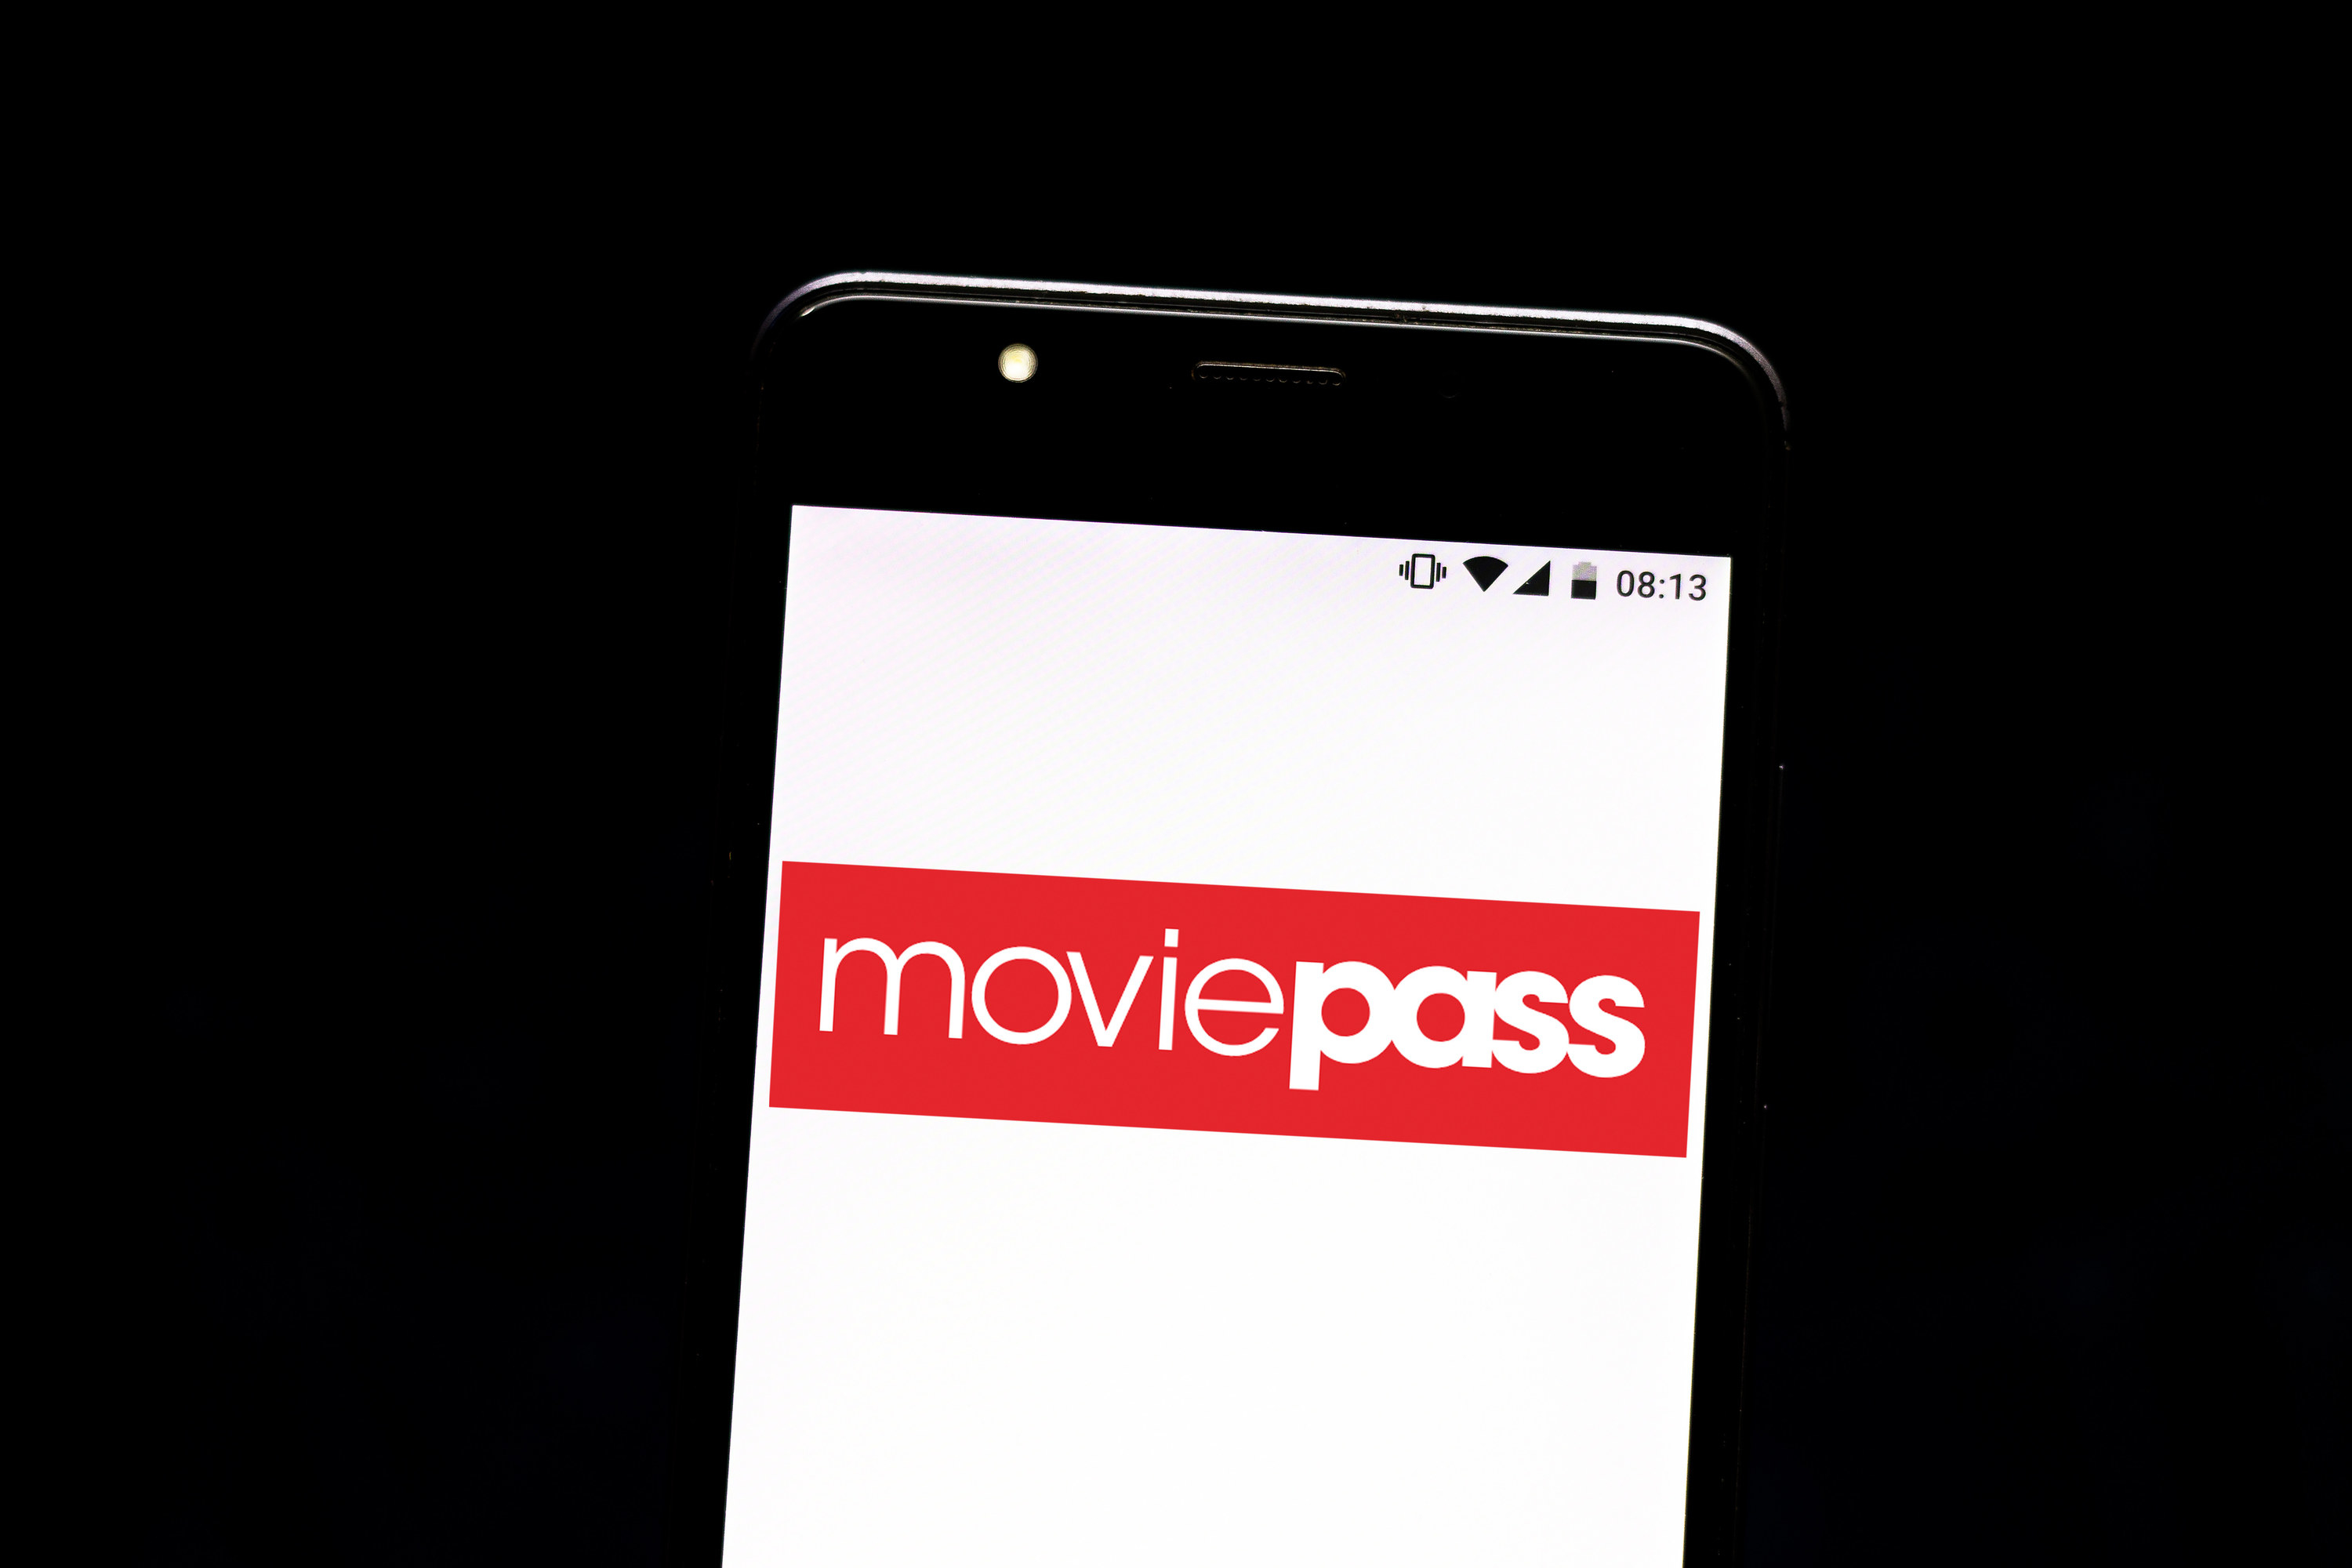 The MoviePass logo on a mobile phone